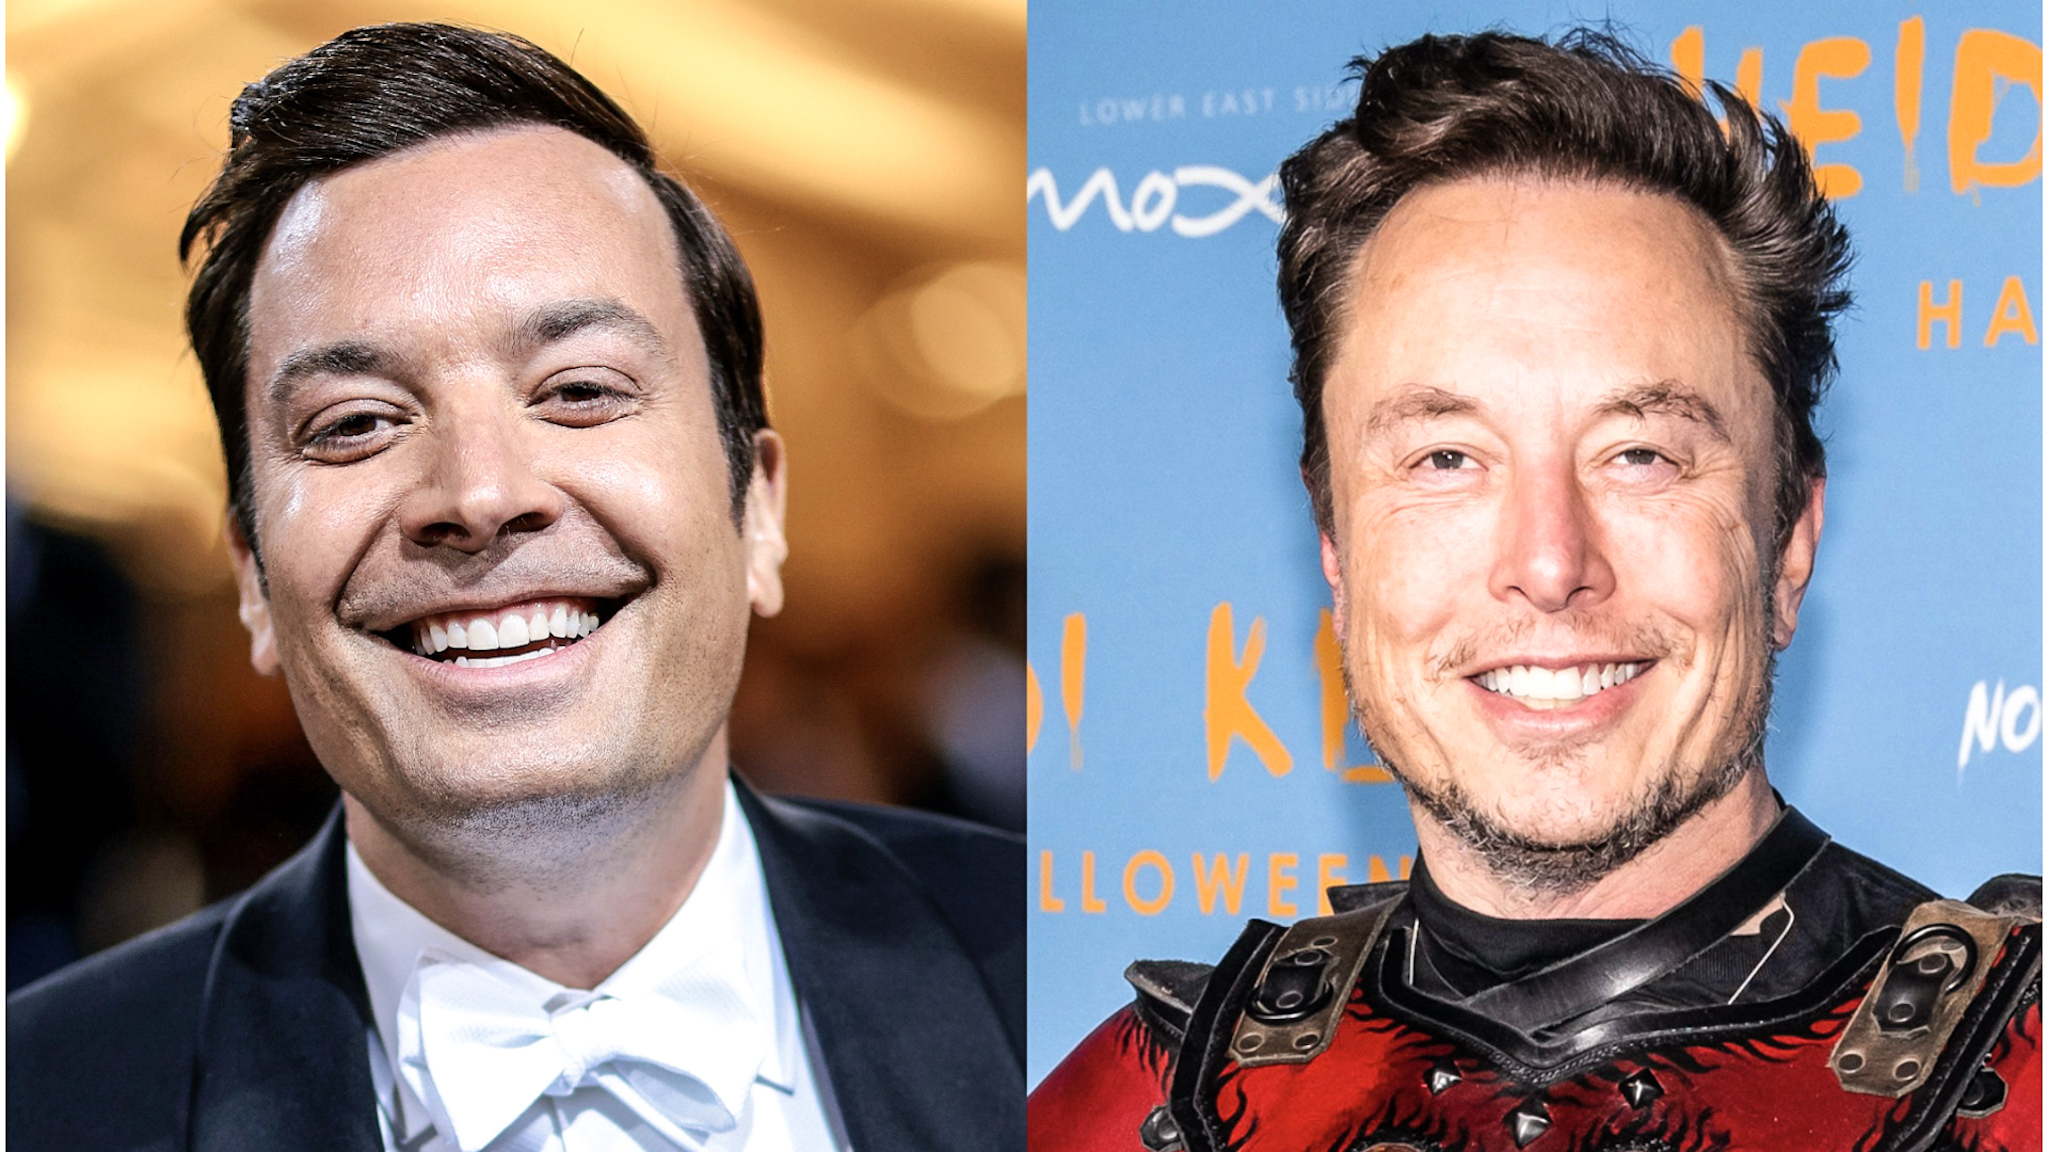 After #RIPJimmyFallon trends on Twitter Elon Musk responds to the TV host with jokes